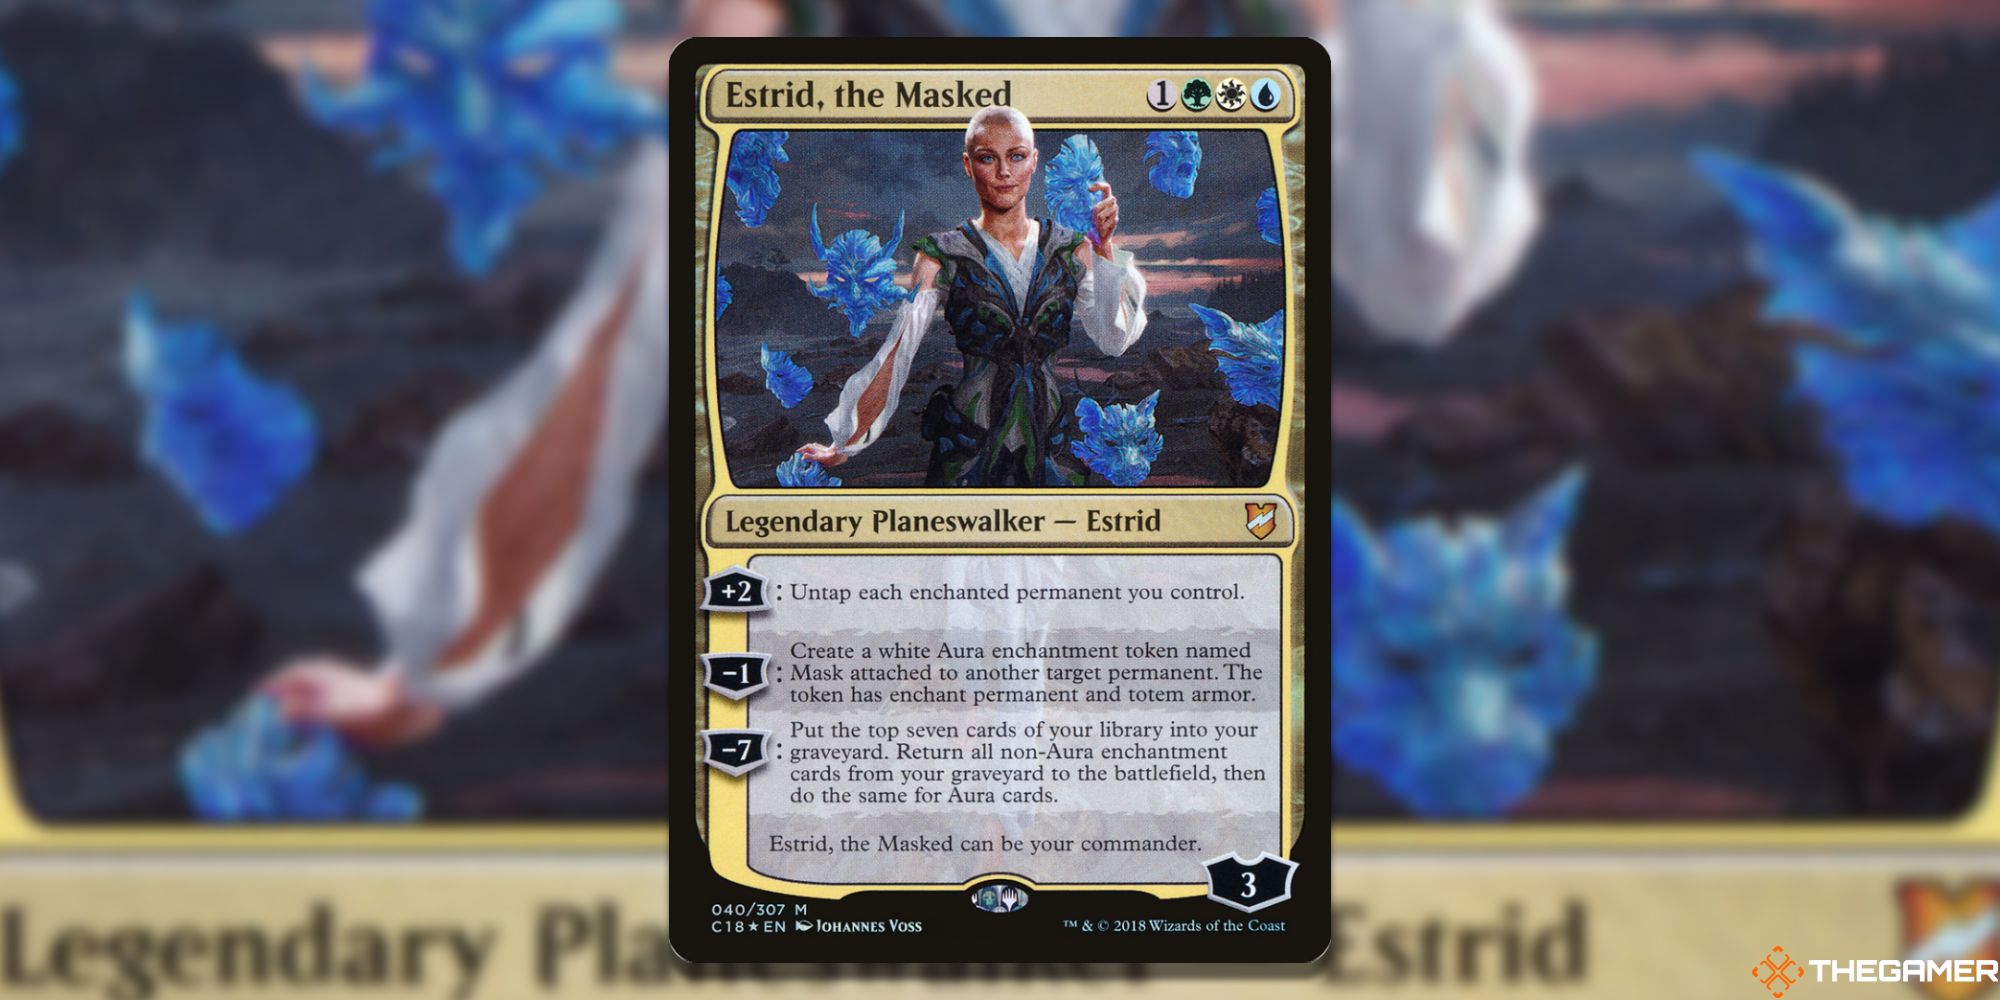 Image of the Estrid the Masked card in Magic: The Gathering, with art by Johannes Voss